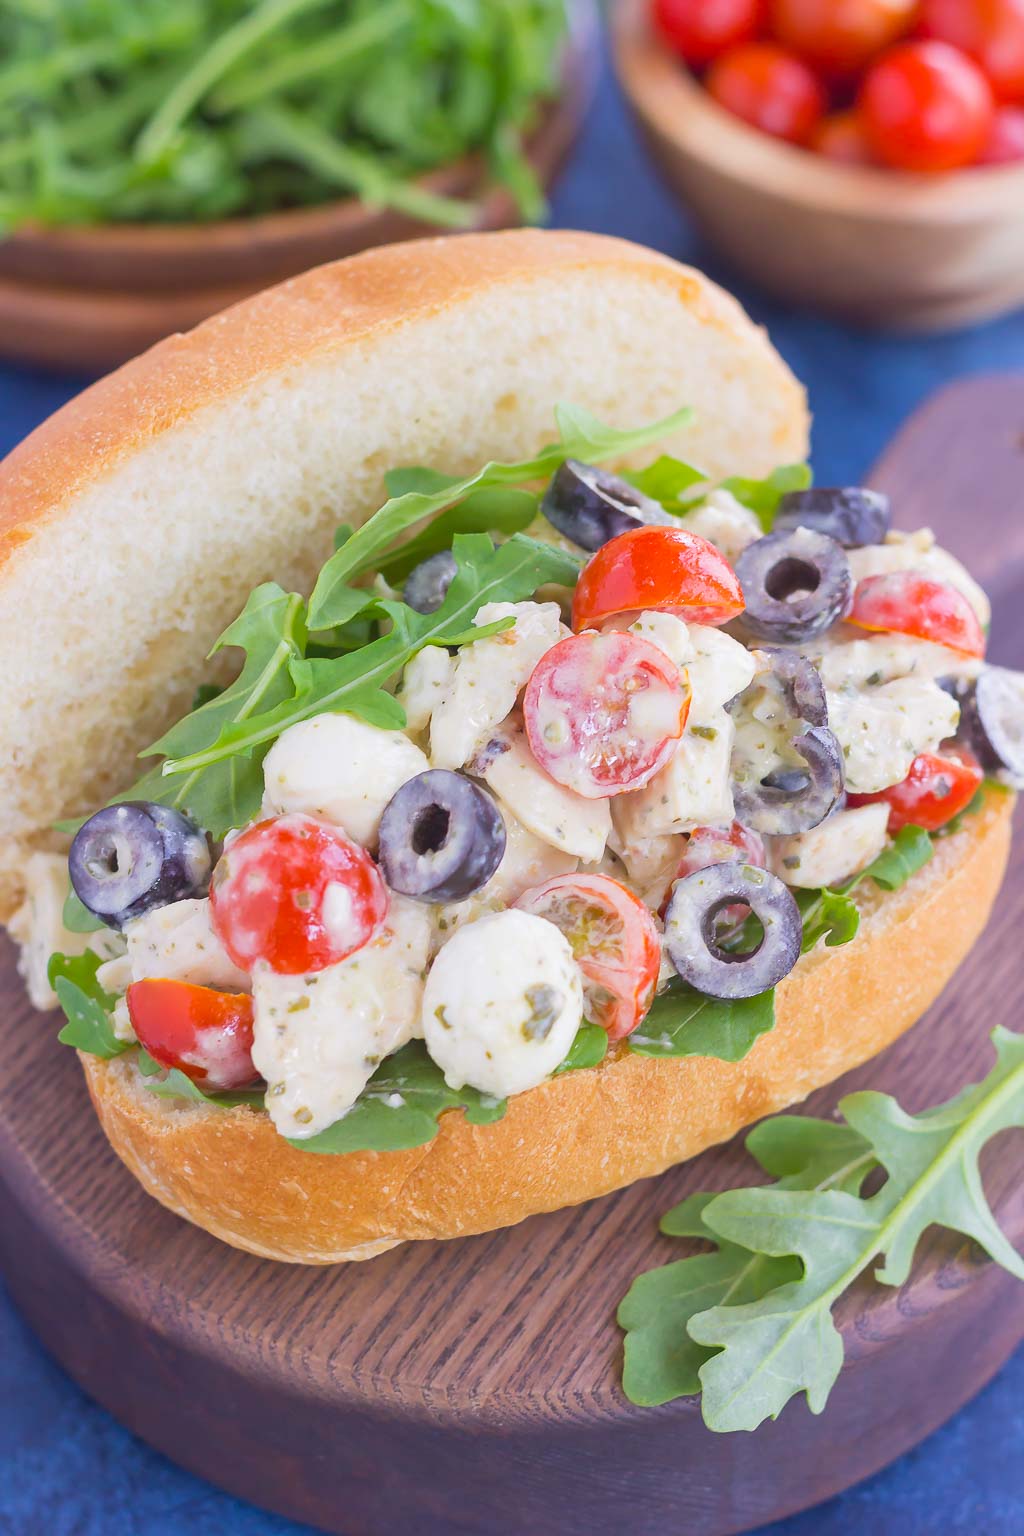 This Italian Chicken Salad is fresh, easy, and bursting with flavor. Loaded with mozzarella cheese, tomatoes, black olives and pesto, this fun twist on a classic flavor will have you coming back for more. This salad is perfect for an easy lunch or dinner and makes delicious sandwiches, too! #chicken #chickensalad #italian #italiansalad #italianchickensalad #saladrecipe #healthysalad #chickenrecipe